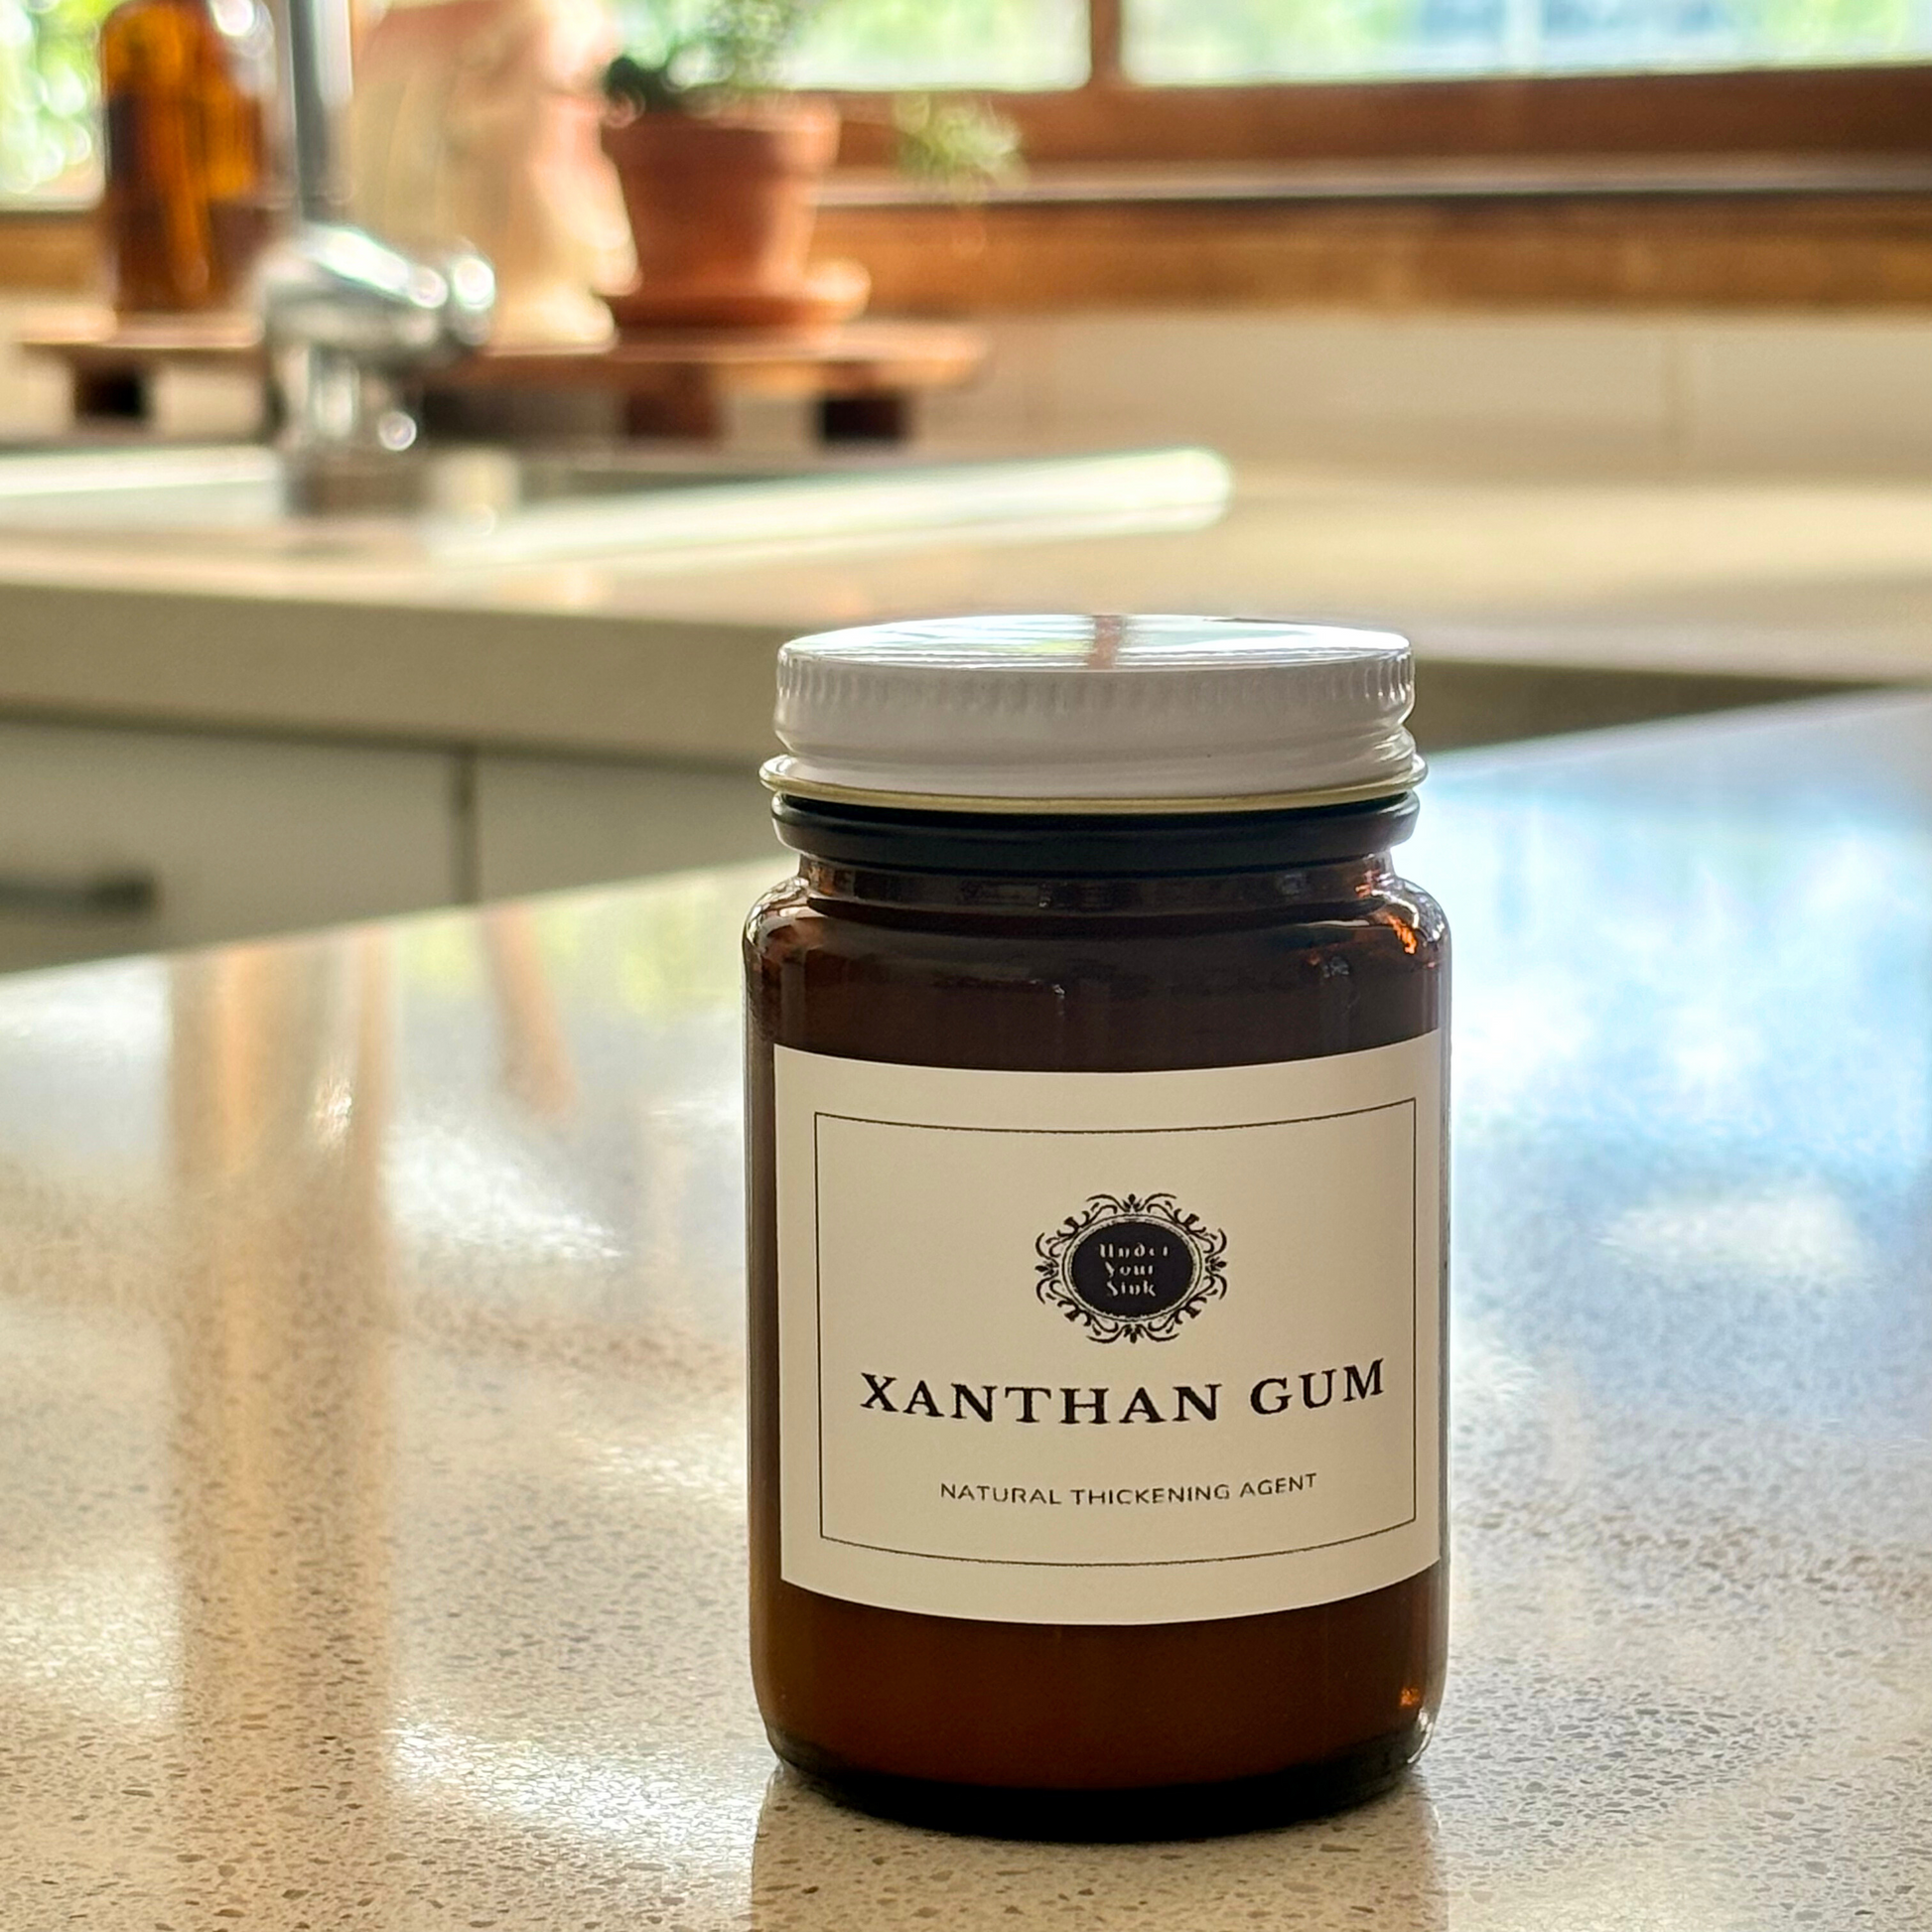 An amber glass jar with a simple white label with Under your Sink Logo and description Xanthan Gum – natural thickening agent. Set in a kitchen with blurred background and focus on the jar. It is a product image for website as this is for sale in various sizes, online with Australia wide delivery.